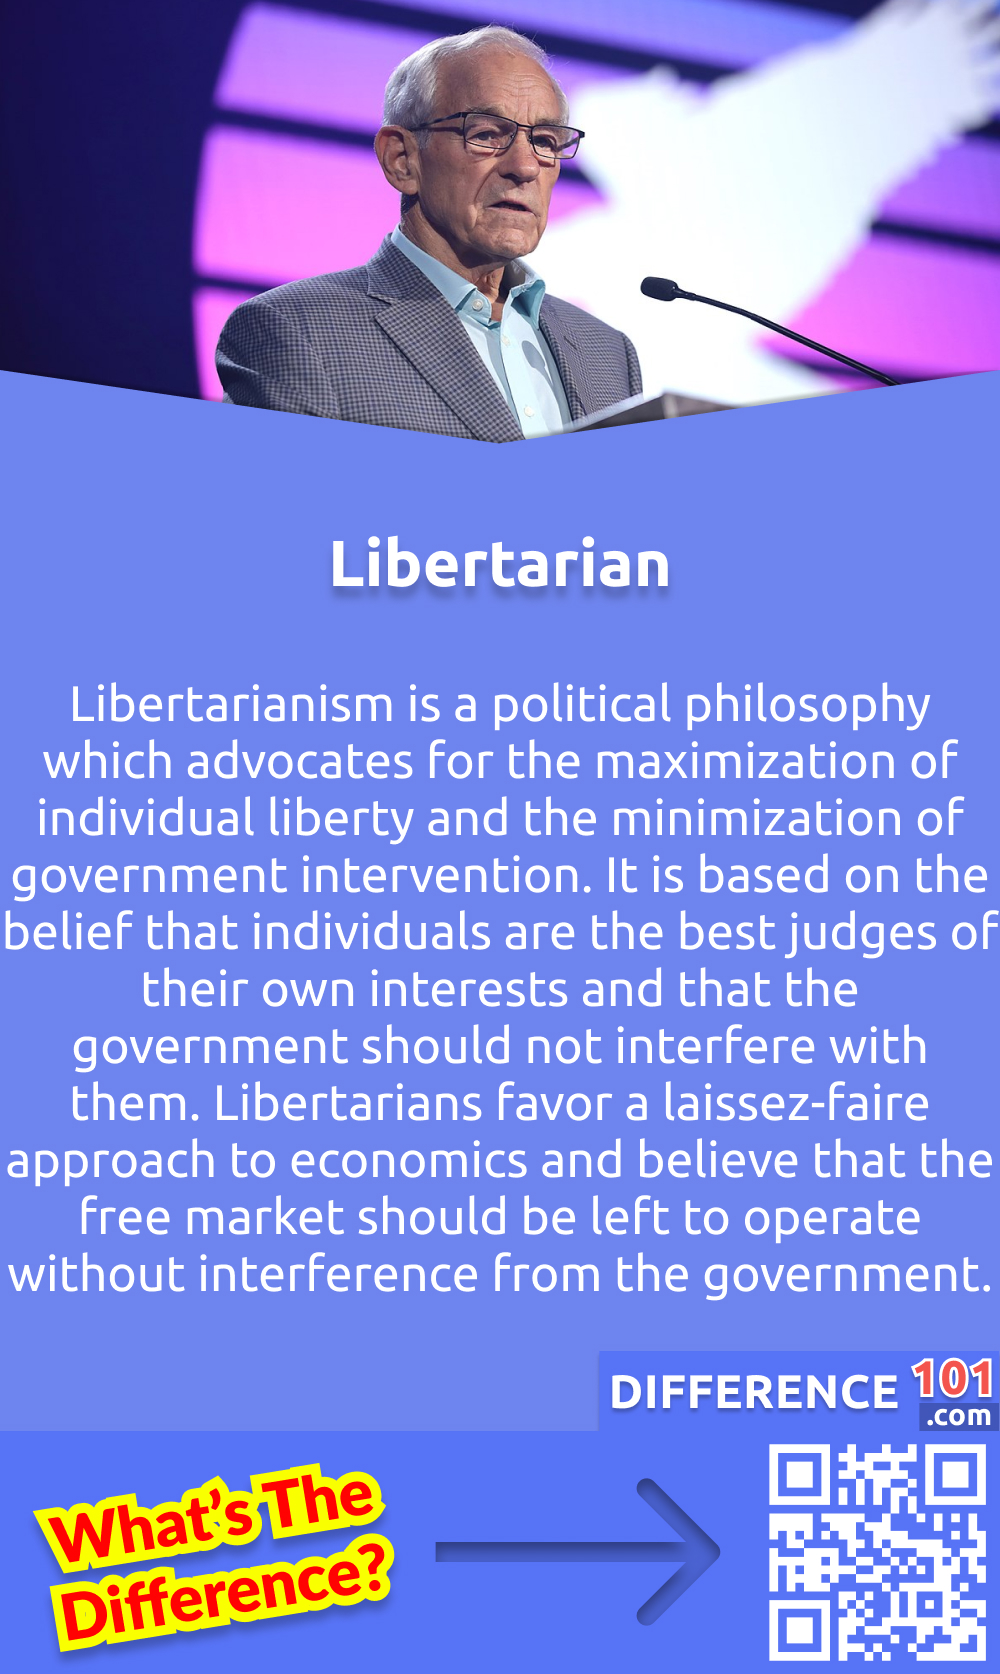 What Is Libertarian? Libertarianism is a political philosophy which advocates for the maximization of individual liberty and the minimization of government intervention. It is based on the belief that individuals are the best judges of their own interests and that the government should not interfere with them. Libertarians favor a laissez-faire approach to economics and believe that the free market should be left to operate without interference from the government. They also oppose government regulations that limit individual freedoms, such as restrictions on free speech or the right to bear arms. They advocate for a limited government that respects individual rights and limits its interference in citizens’ lives. Furthermore, libertarians value personal responsibility and oppose government-funded welfare programs. Ultimately, libertarians believe that individuals should be free to pursue their own interests without government interference.
